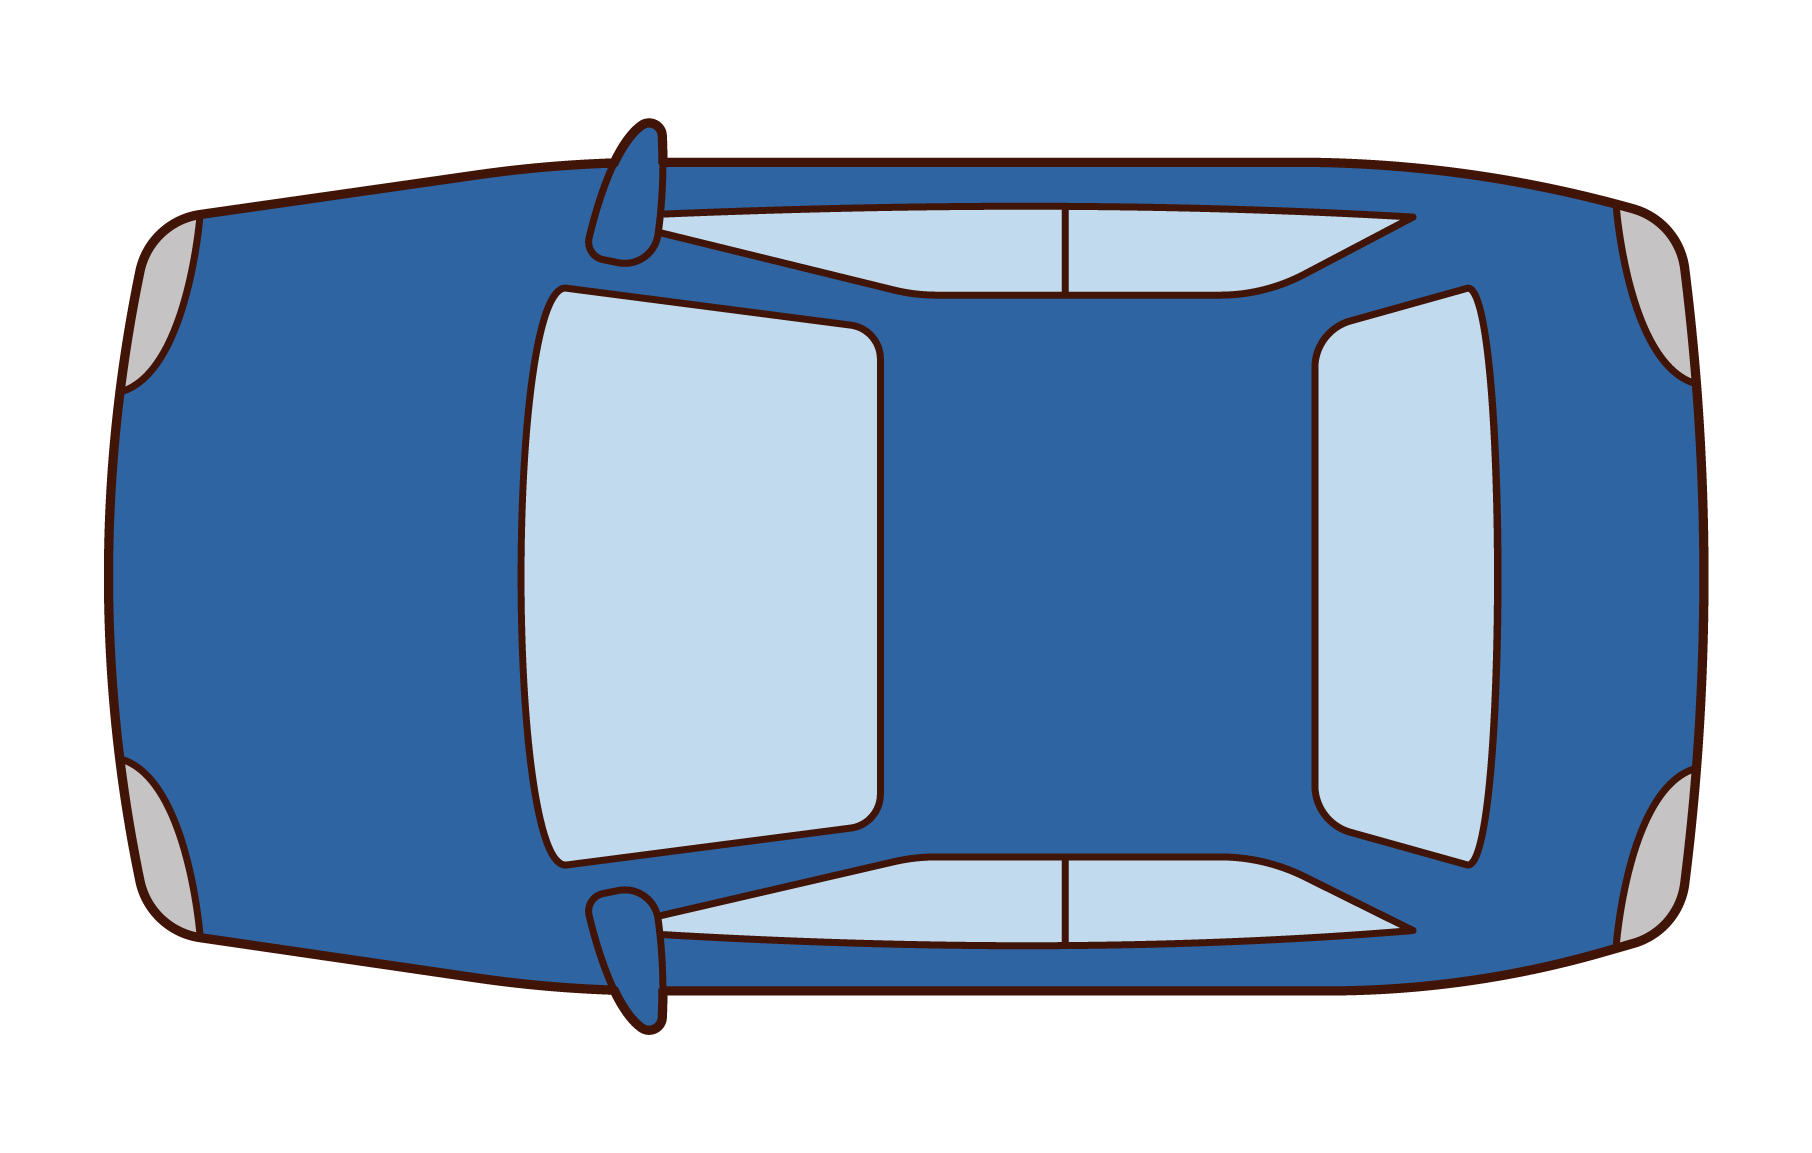 Illustration of a car seen from above